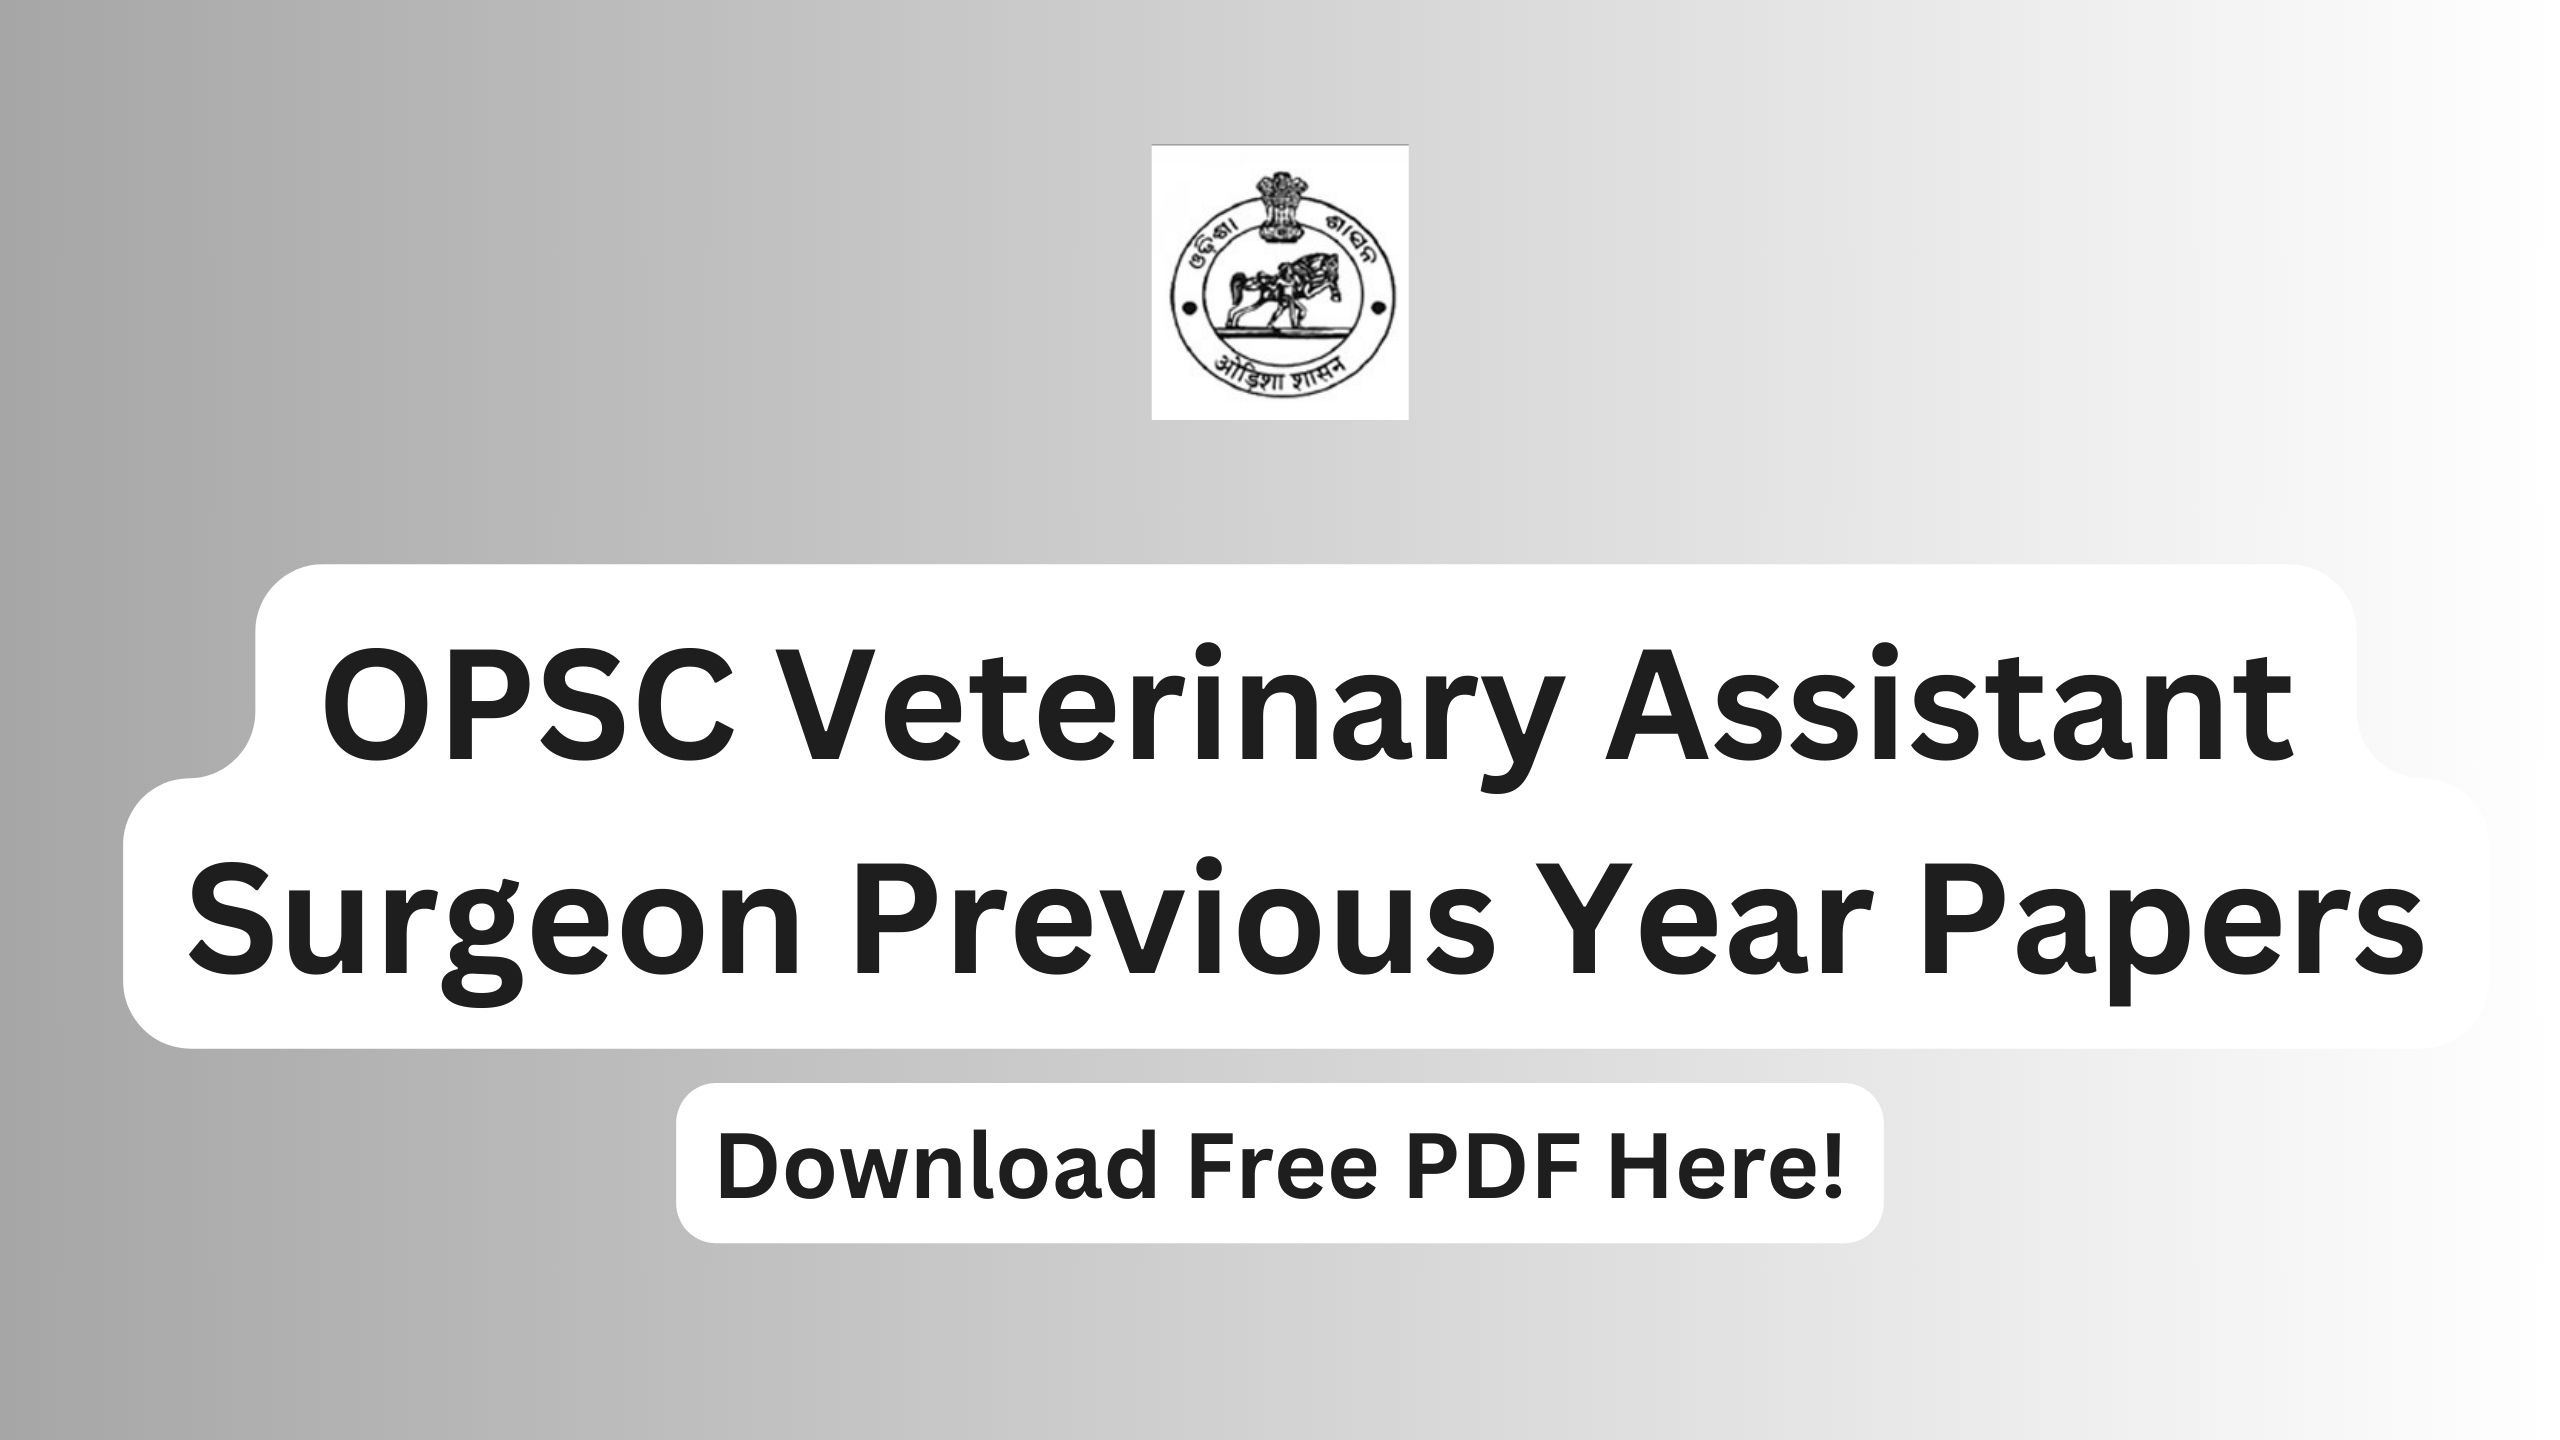 OPSC Veterinary Assistant Surgeon Previous Year Papers